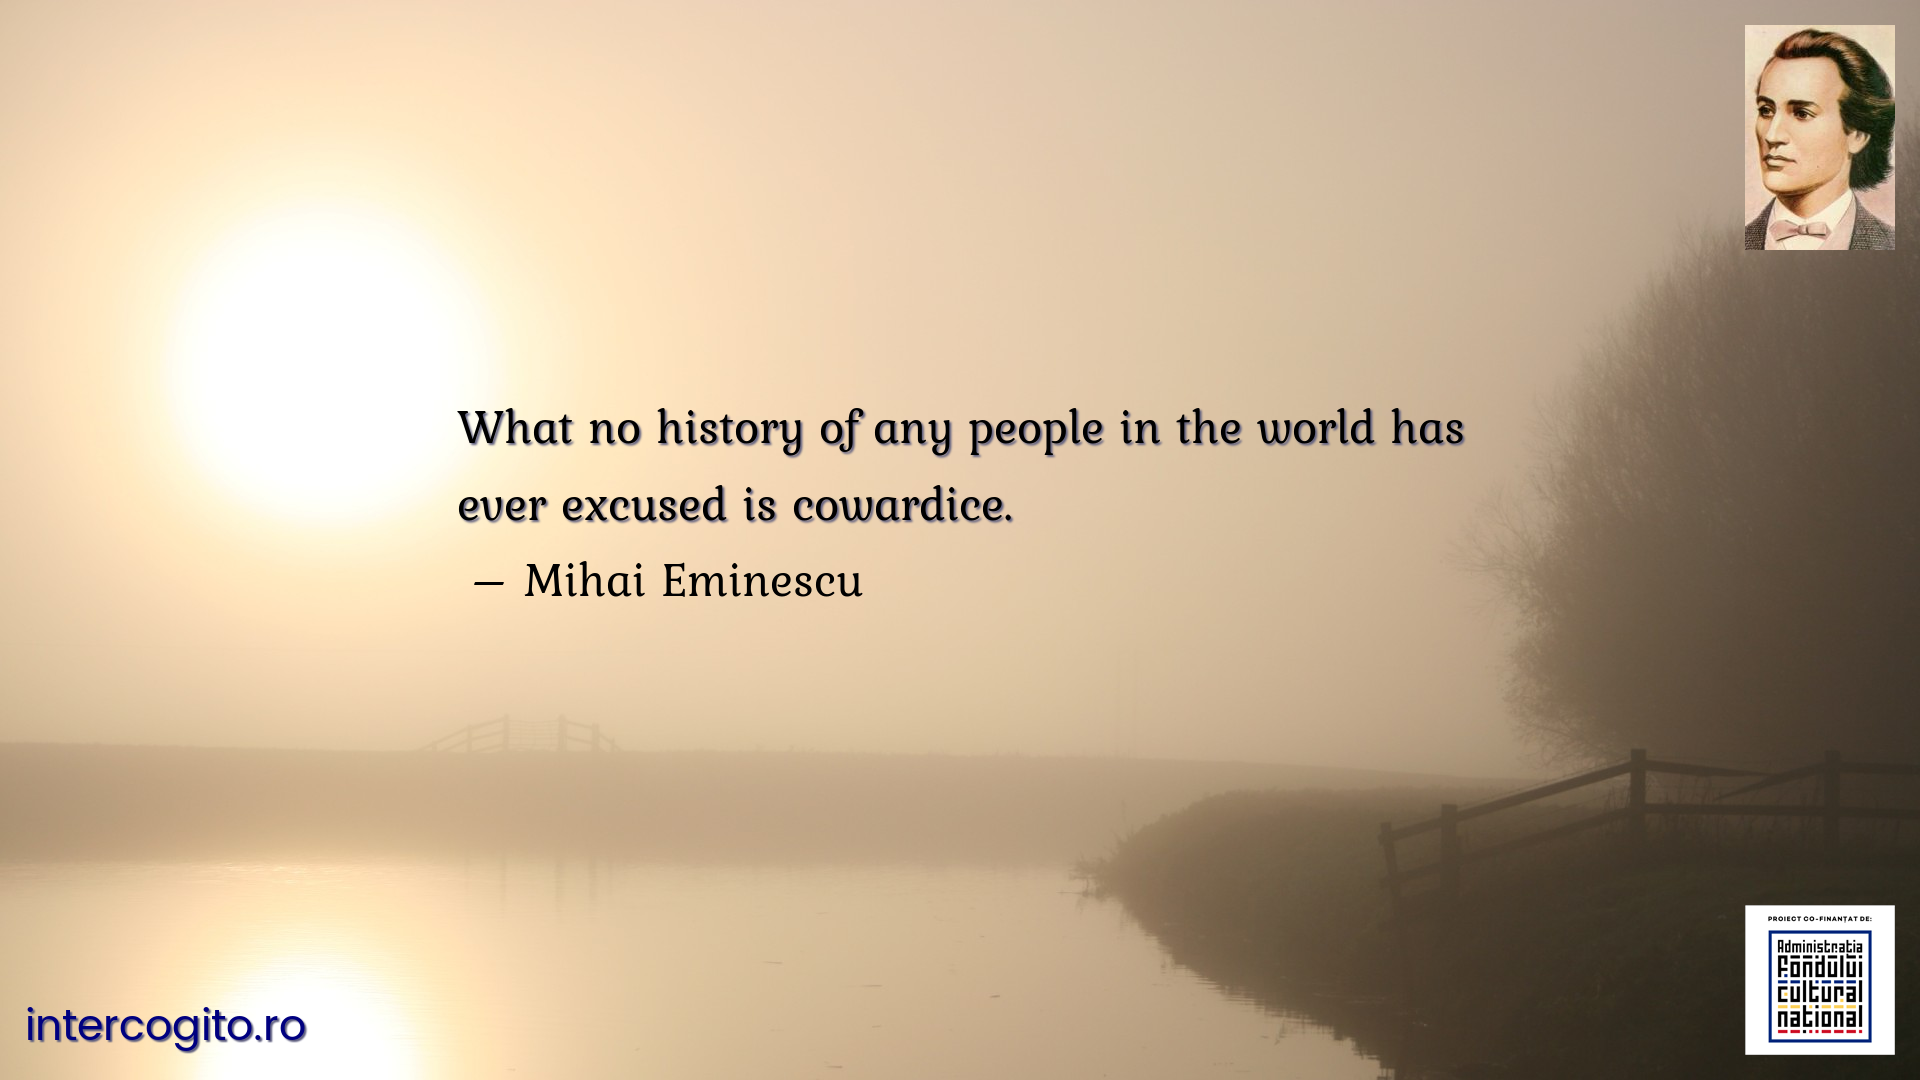 What no history of any people in the world has ever excused is cowardice.